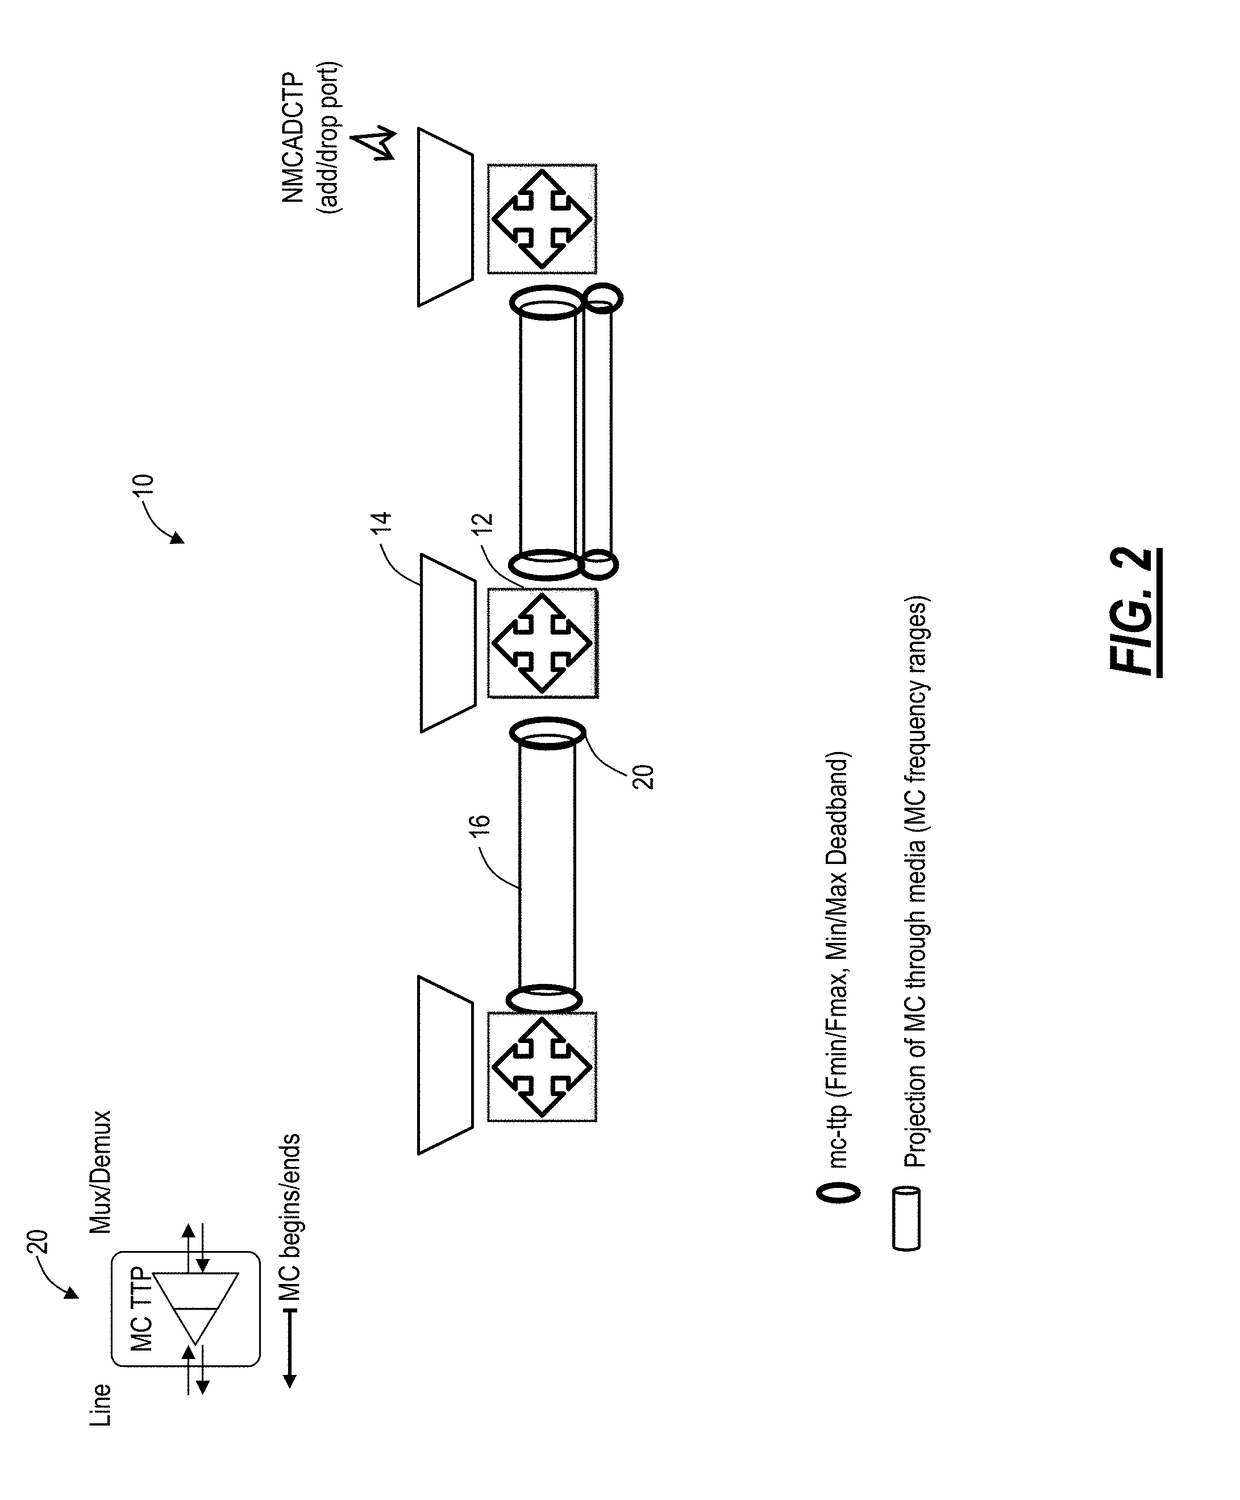 Management of flexible grid and supercarriers in optical networks using a data model